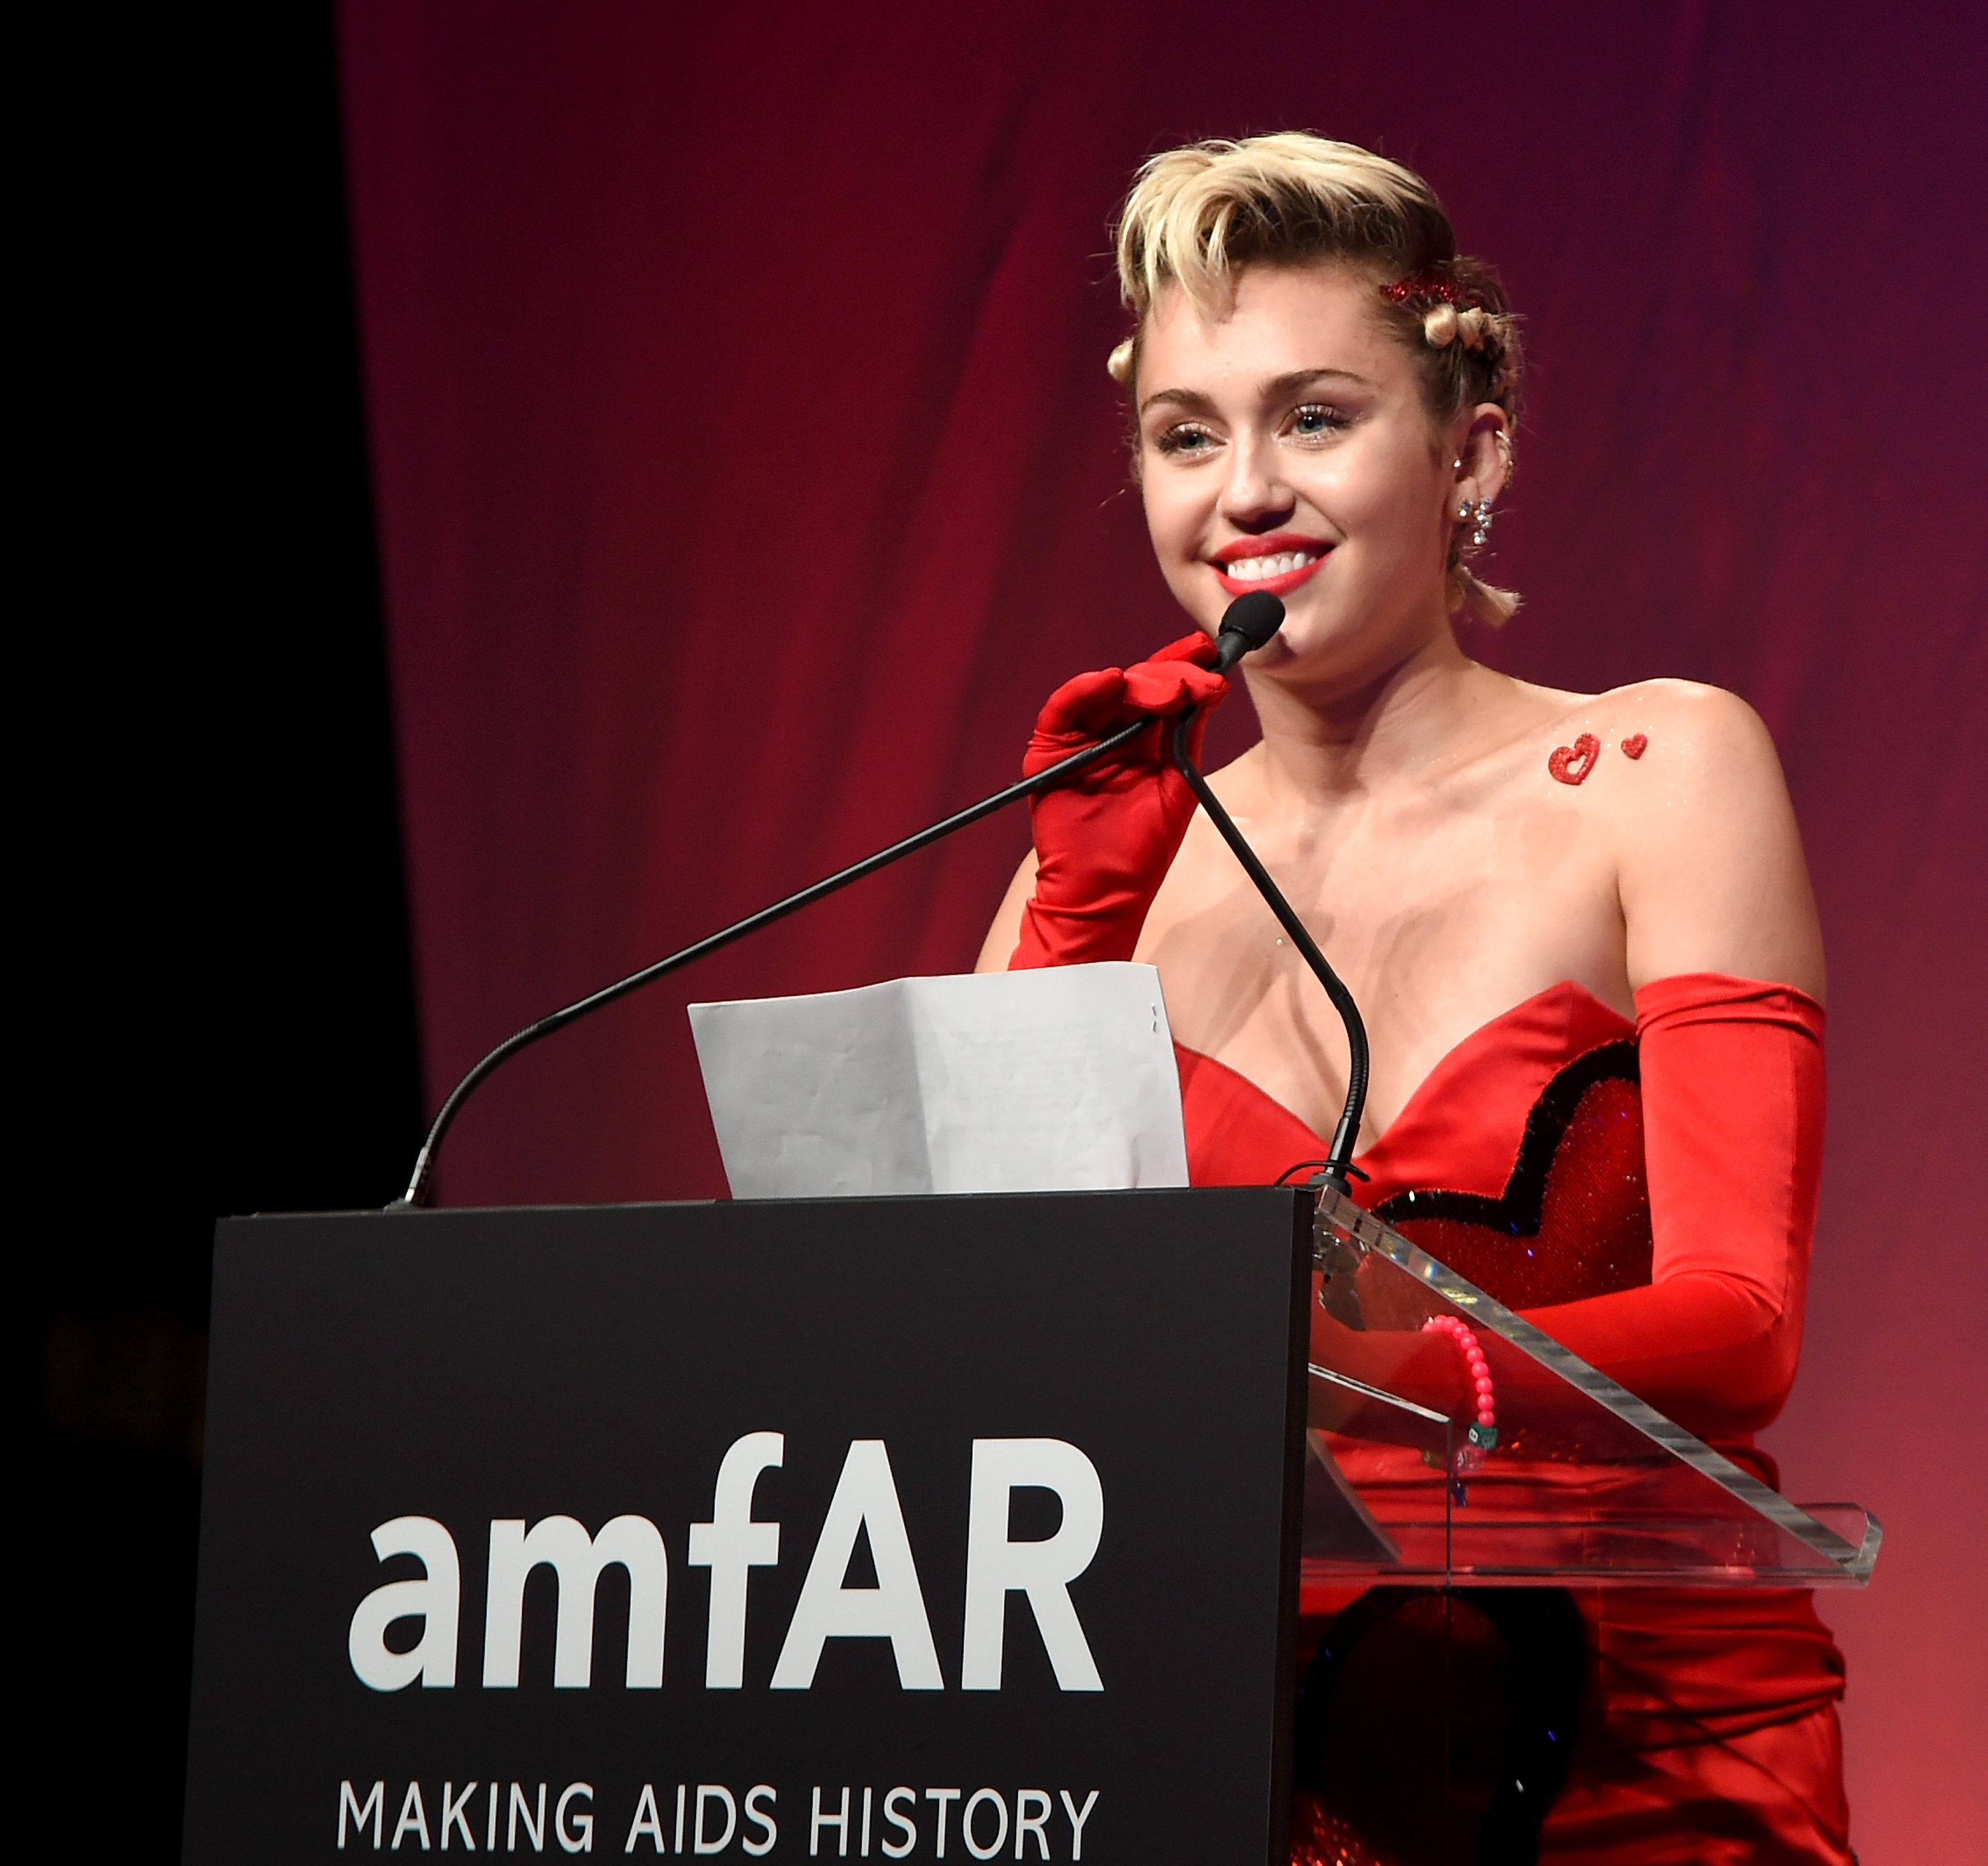 NEW YORK, NY - JUNE 16:  Miley Cyrus attends Moet & Chandon Toasts to the amfAR Inspiration Gala at Spring Studios on June 16, 2015 in New York City.  (Photo by Jamie McCarthy/Getty Images for Moet & Chandon)